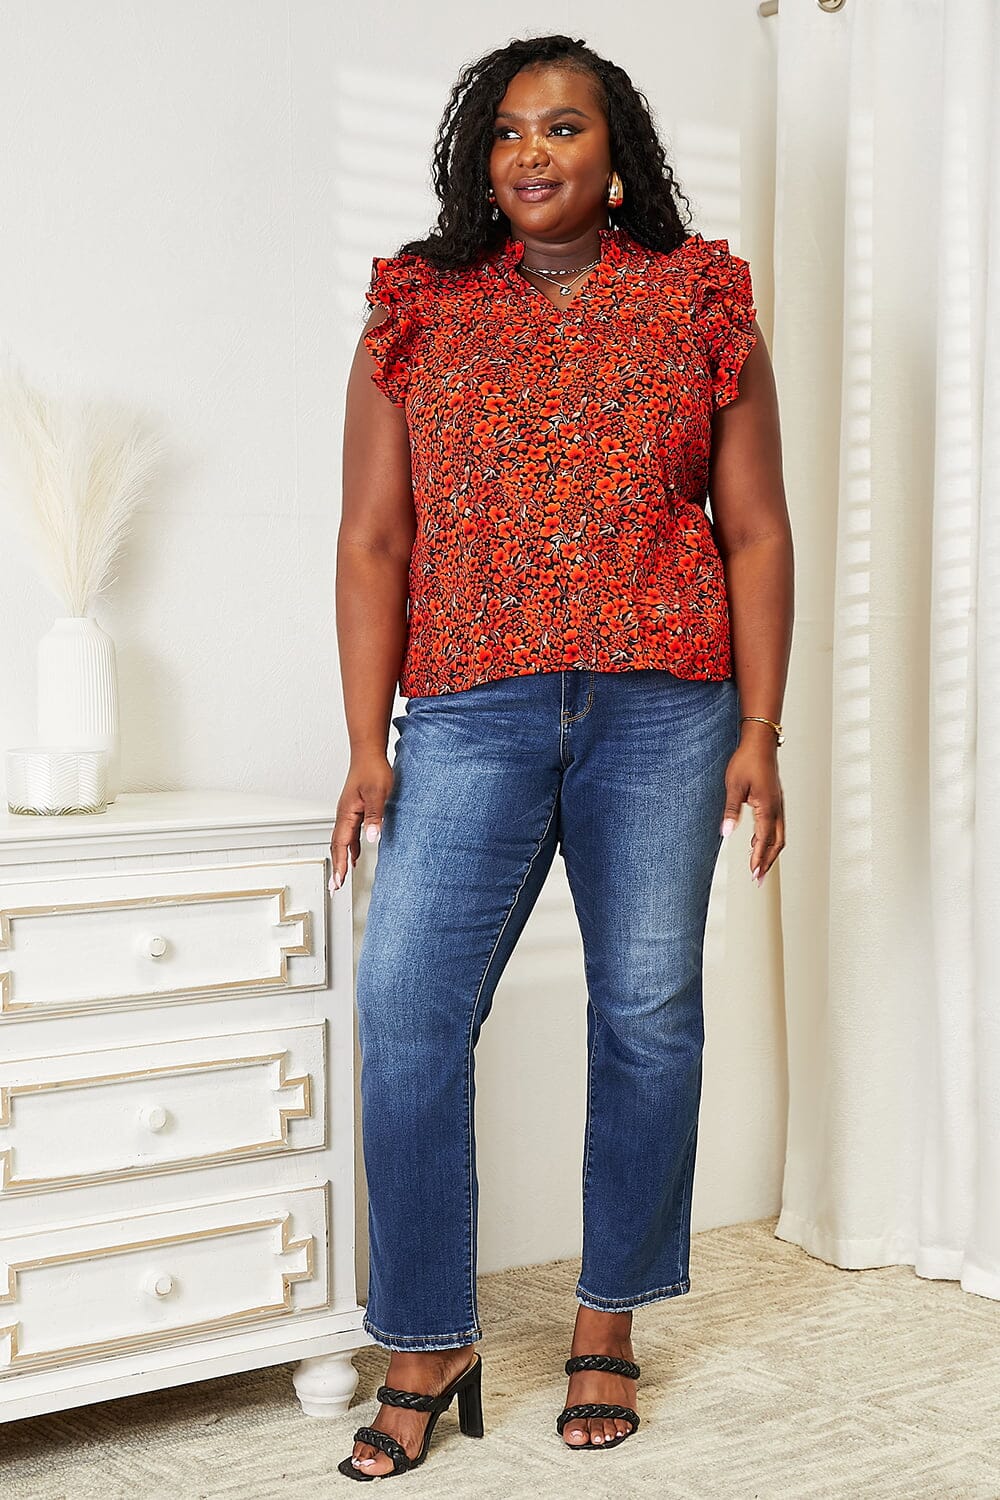 Double Take Red Orange Floral Ruffle Flutter Sleeve Notched Neck Blouse Top Shirts & Tops jehouze 